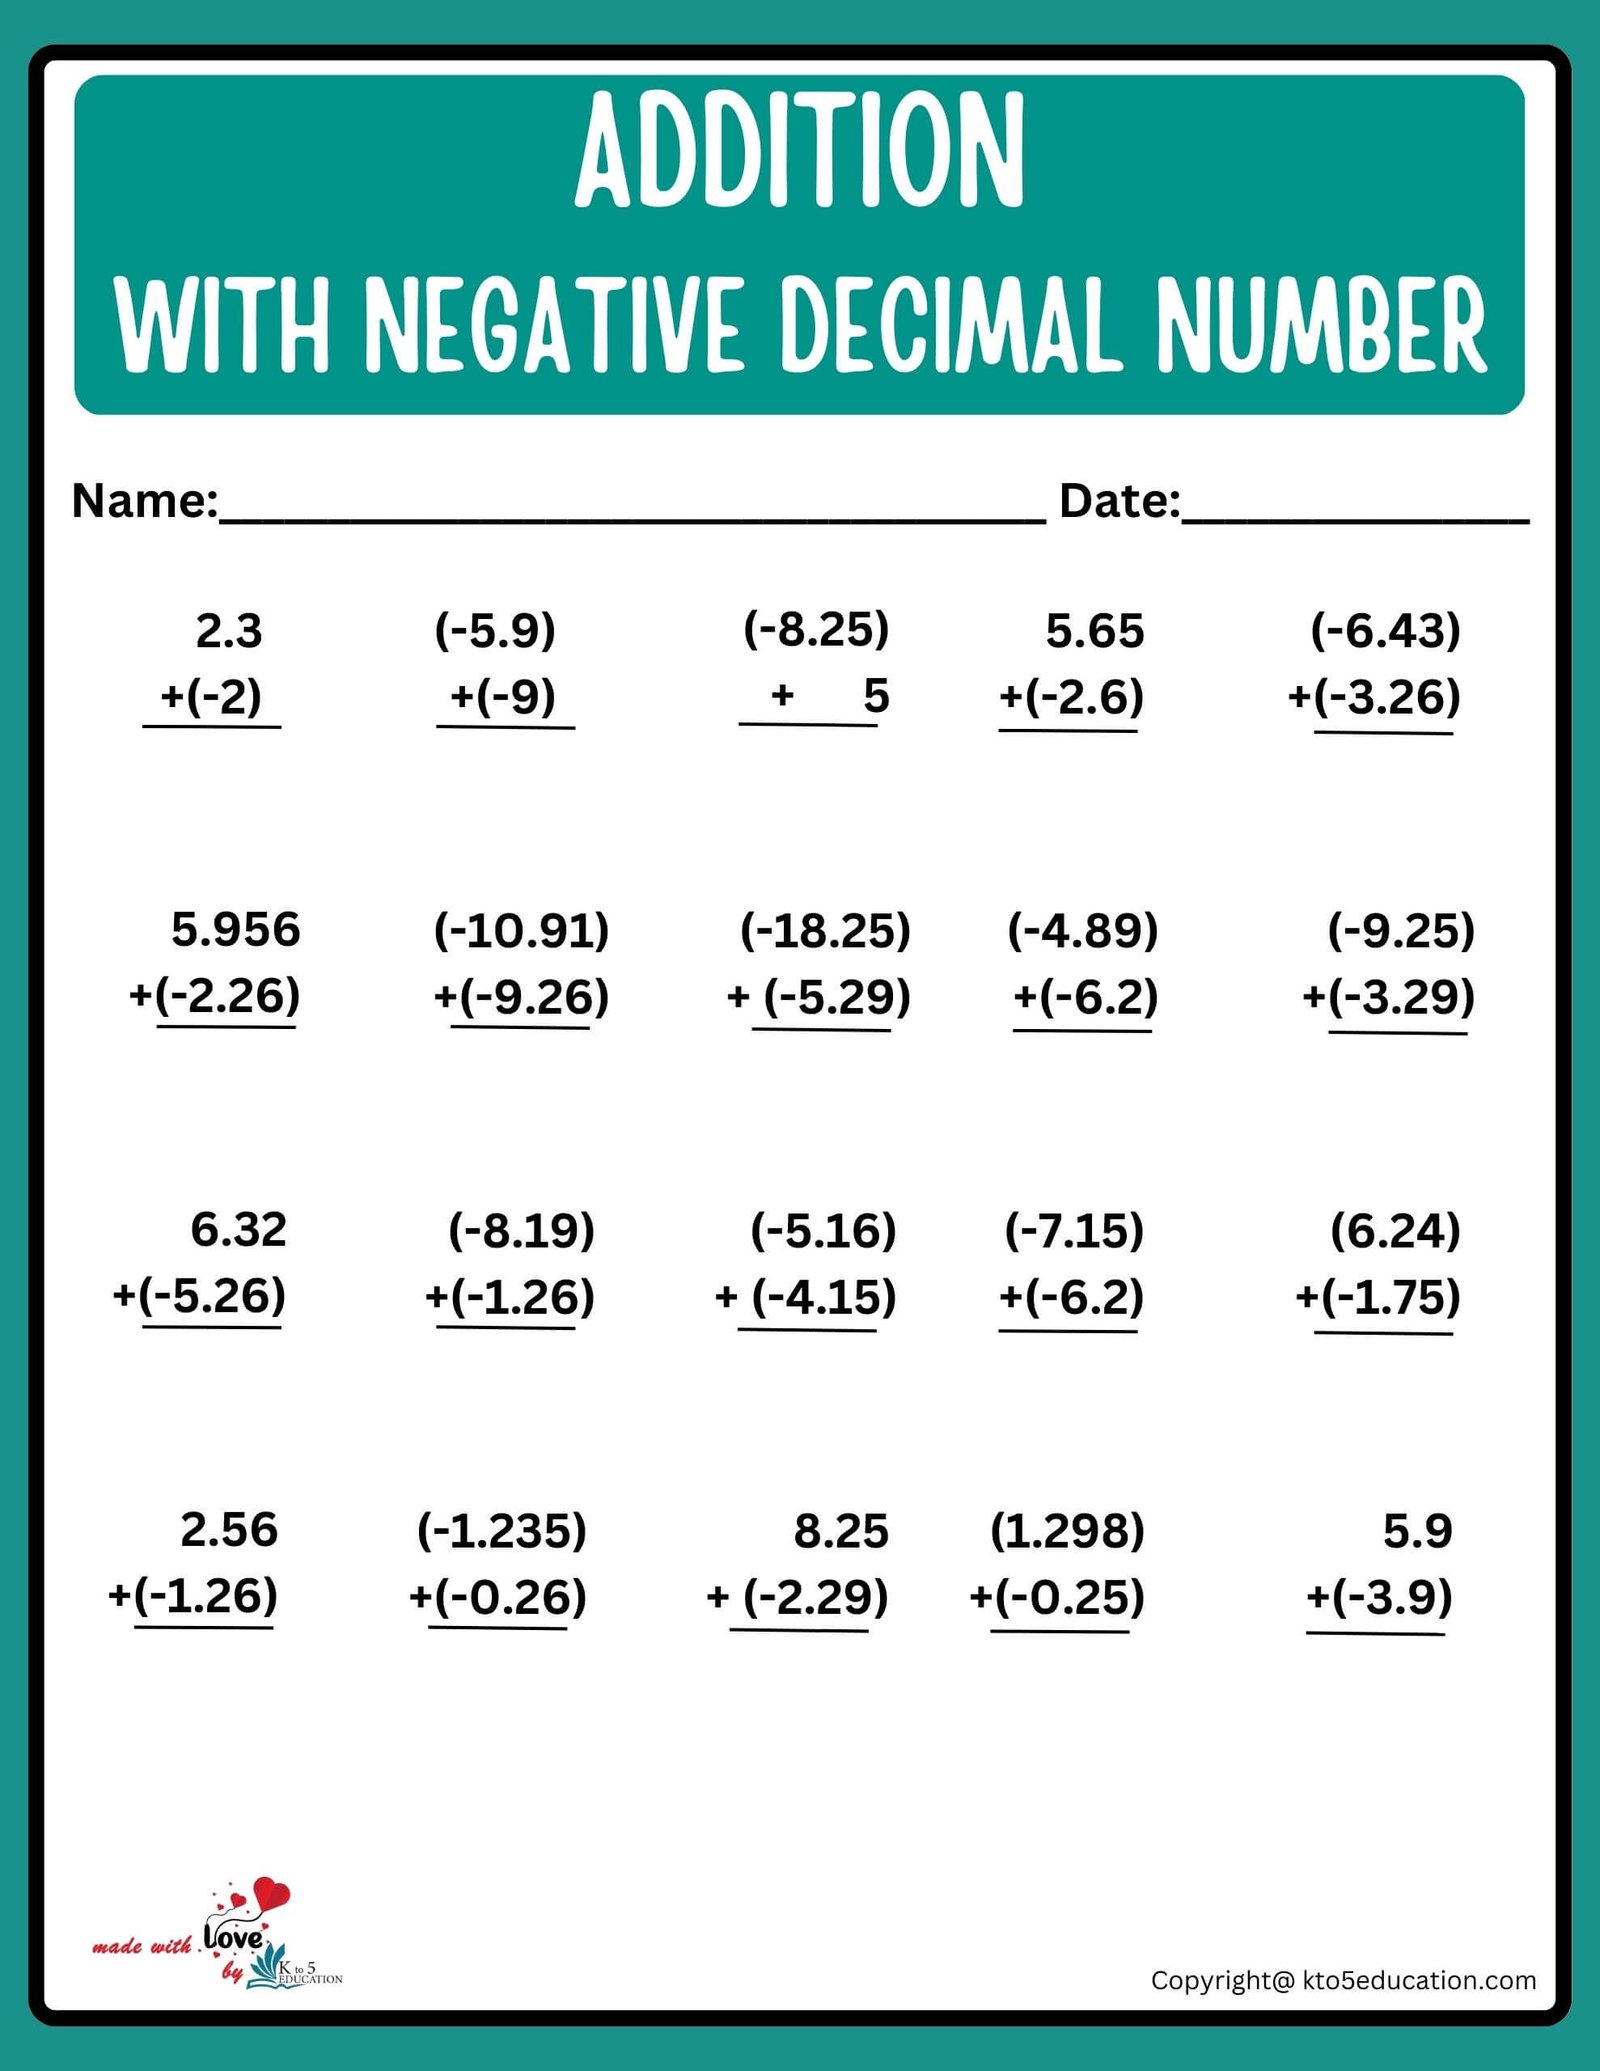 Addition With Negative Decimal Numbers Worksheet